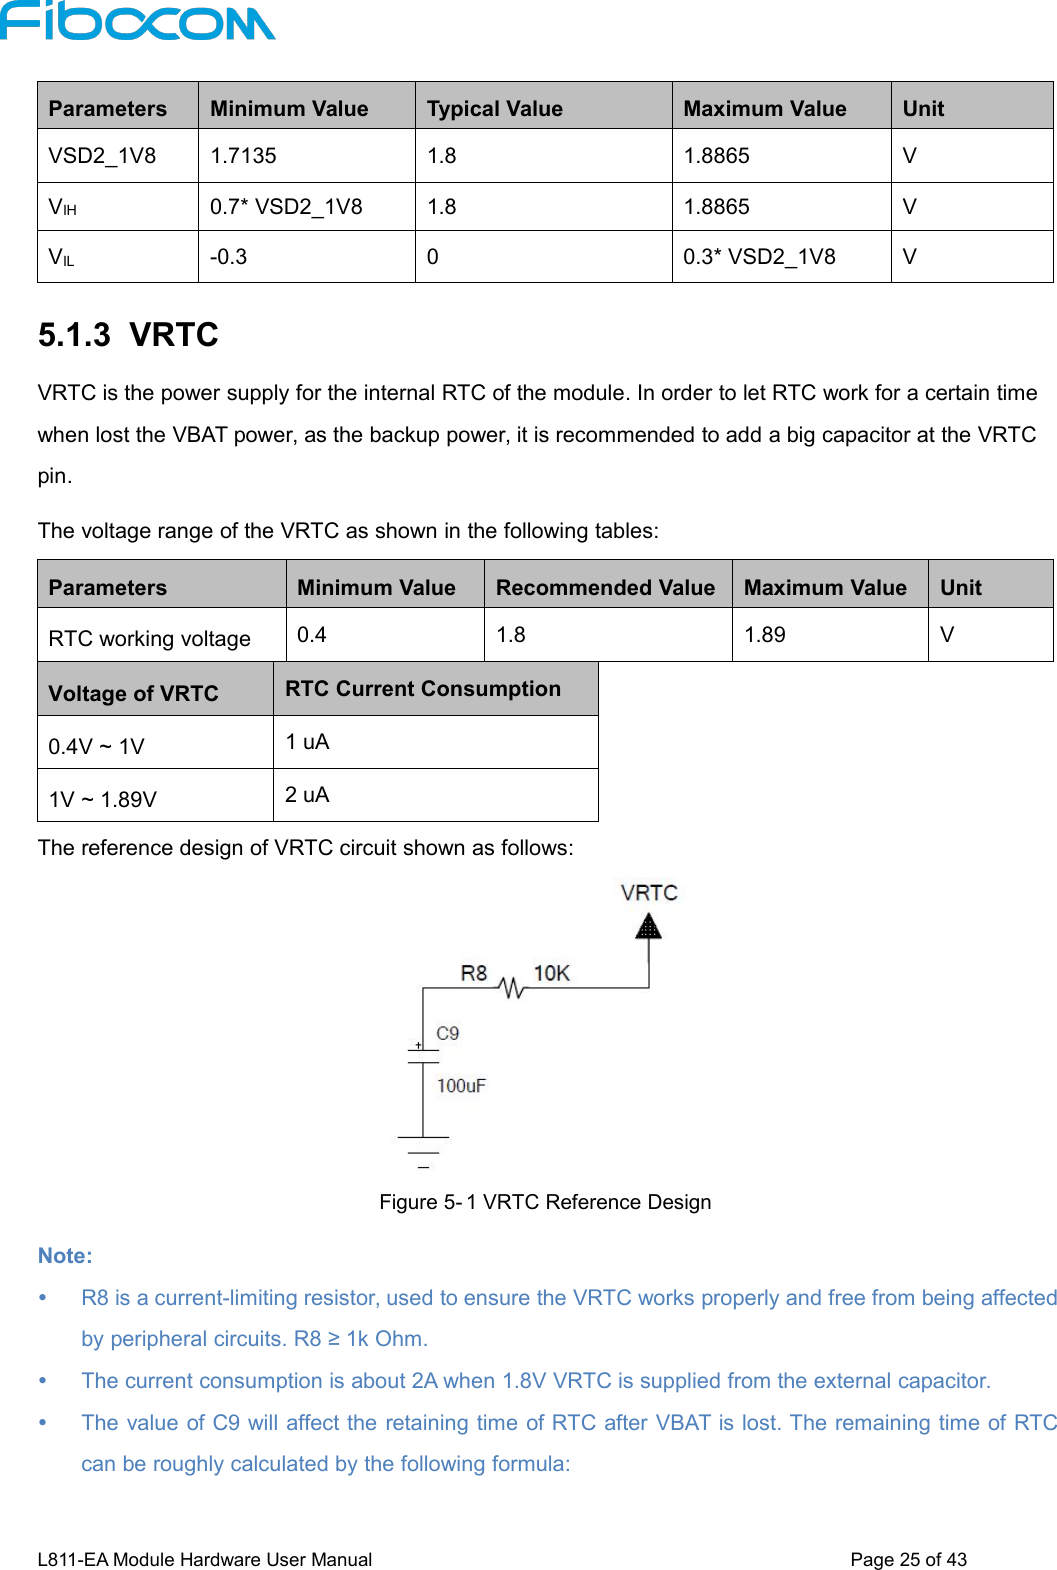 L811-EA Module Hardware User Manual Page25of43ParametersMinimum ValueTypical ValueMaximum ValueUnitVSD2_1V81.71351.81.8865VVIH0.7* VSD2_1V81.81.8865VVIL-0.300.3* VSD2_1V8V5.1.3 VRTCVRTC is the power supply for the internal RTC of the module. In order to let RTC work for a certain timewhen lost the VBAT power, as the backup power, it is recommended to add a big capacitor at the VRTCpin.The voltage range of the VRTC as shown in the following tables:ParametersMinimum ValueRecommended ValueMaximum ValueUnitRTC working voltage0.41.81.89VVoltage of VRTCRTC Current Consumption0.4V ~ 1V1 uA1V ~ 1.89V2 uAThe reference design of VRTC circuit shown as follows:Figure 5- 1 VRTC Reference DesignNote:R8 is a current-limiting resistor, used to ensure the VRTC works properly and free from being affectedby peripheral circuits. R8 ≥ 1k Ohm.The current consumption is about 2A when 1.8V VRTC is supplied from the external capacitor.The value of C9 will affect the retaining time of RTC after VBAT is lost. The remaining time of RTCcan be roughly calculated by the following formula: